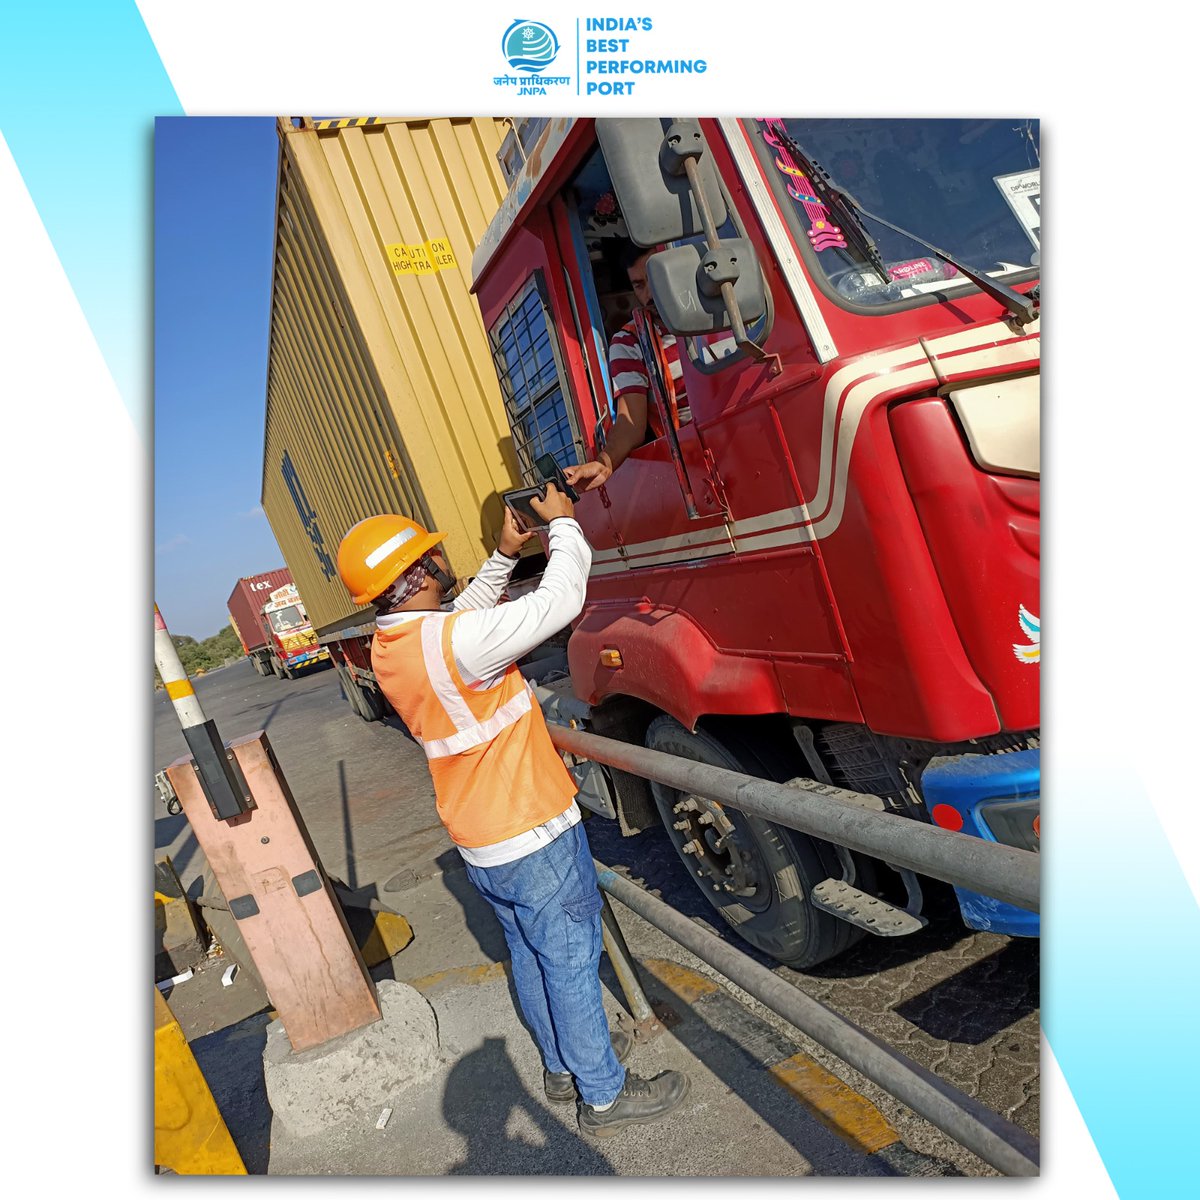 A Year of Digital Progress! JNPA celebrates the 1st anniversary of introducing the online system of Port Driving Permit (PDP) for container tractor-trailer drivers on May 8th, 2023. Congratulations to all those who worked hard behind this. This system has reduced paperwork,